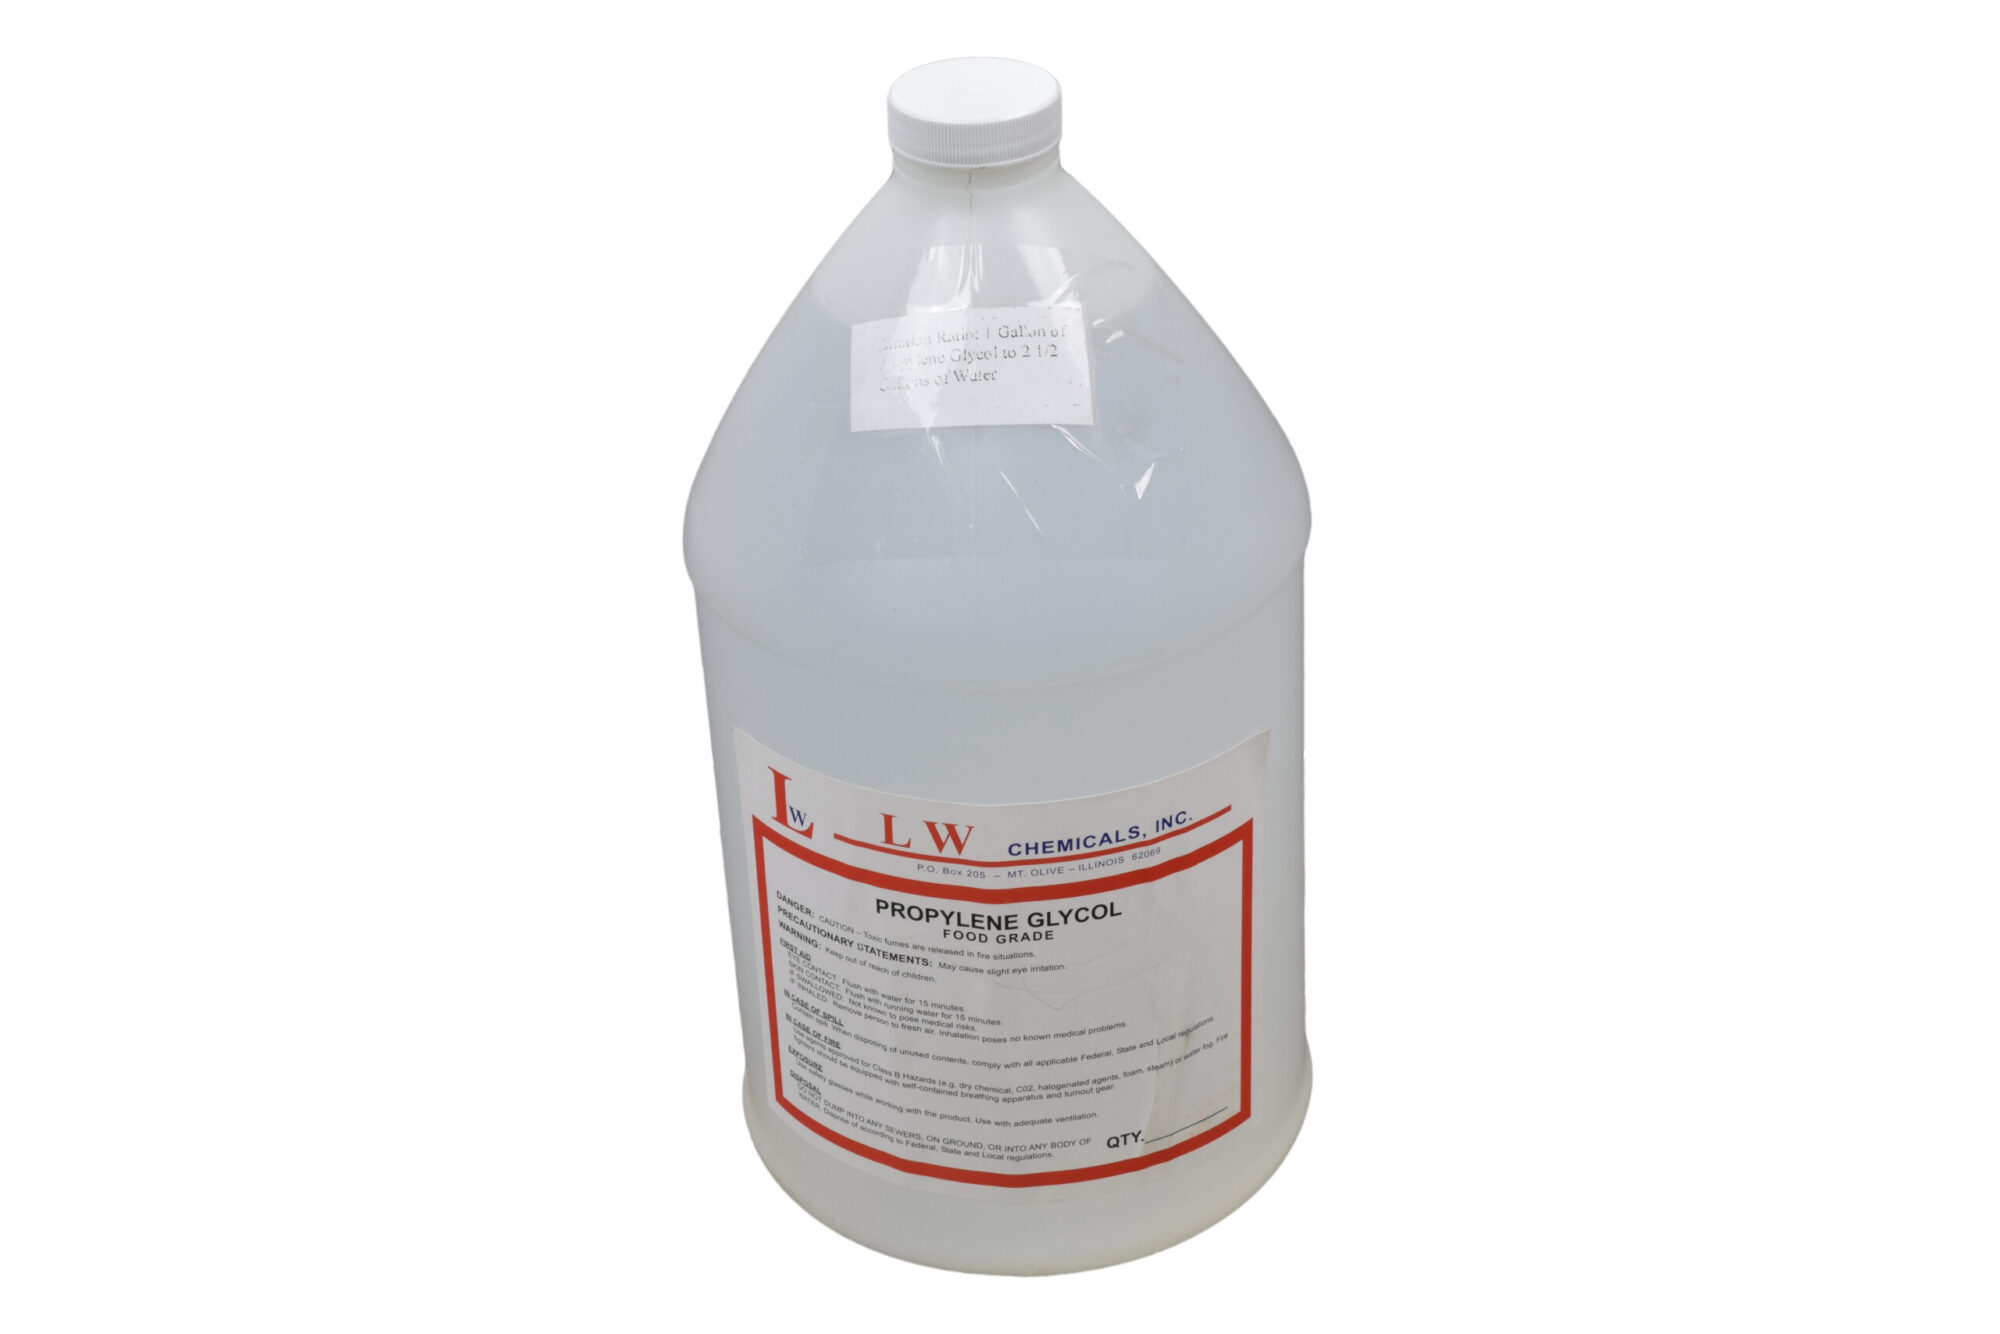 MGL-1 Food Grade Glycol Concentrate - Makes 3 1/2 Gallons of Solution